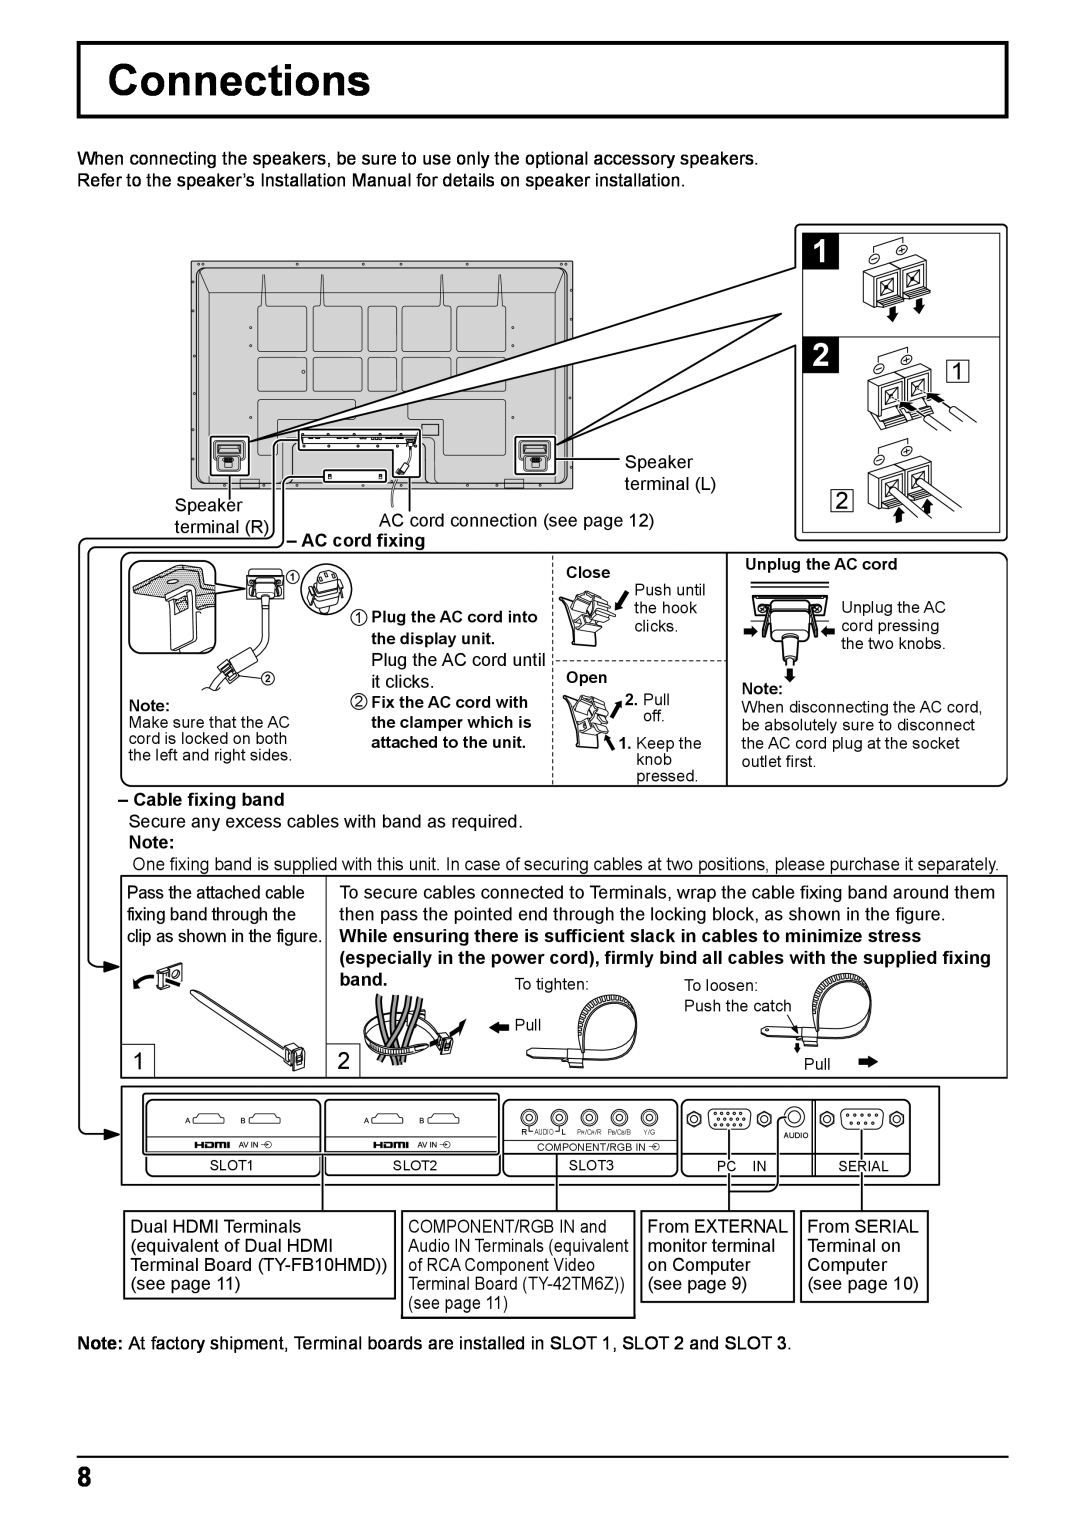 Panasonic TH-65VX100E, TH-50VX100E operating instructions Connections, AC cord fixing, Cable fixing band 